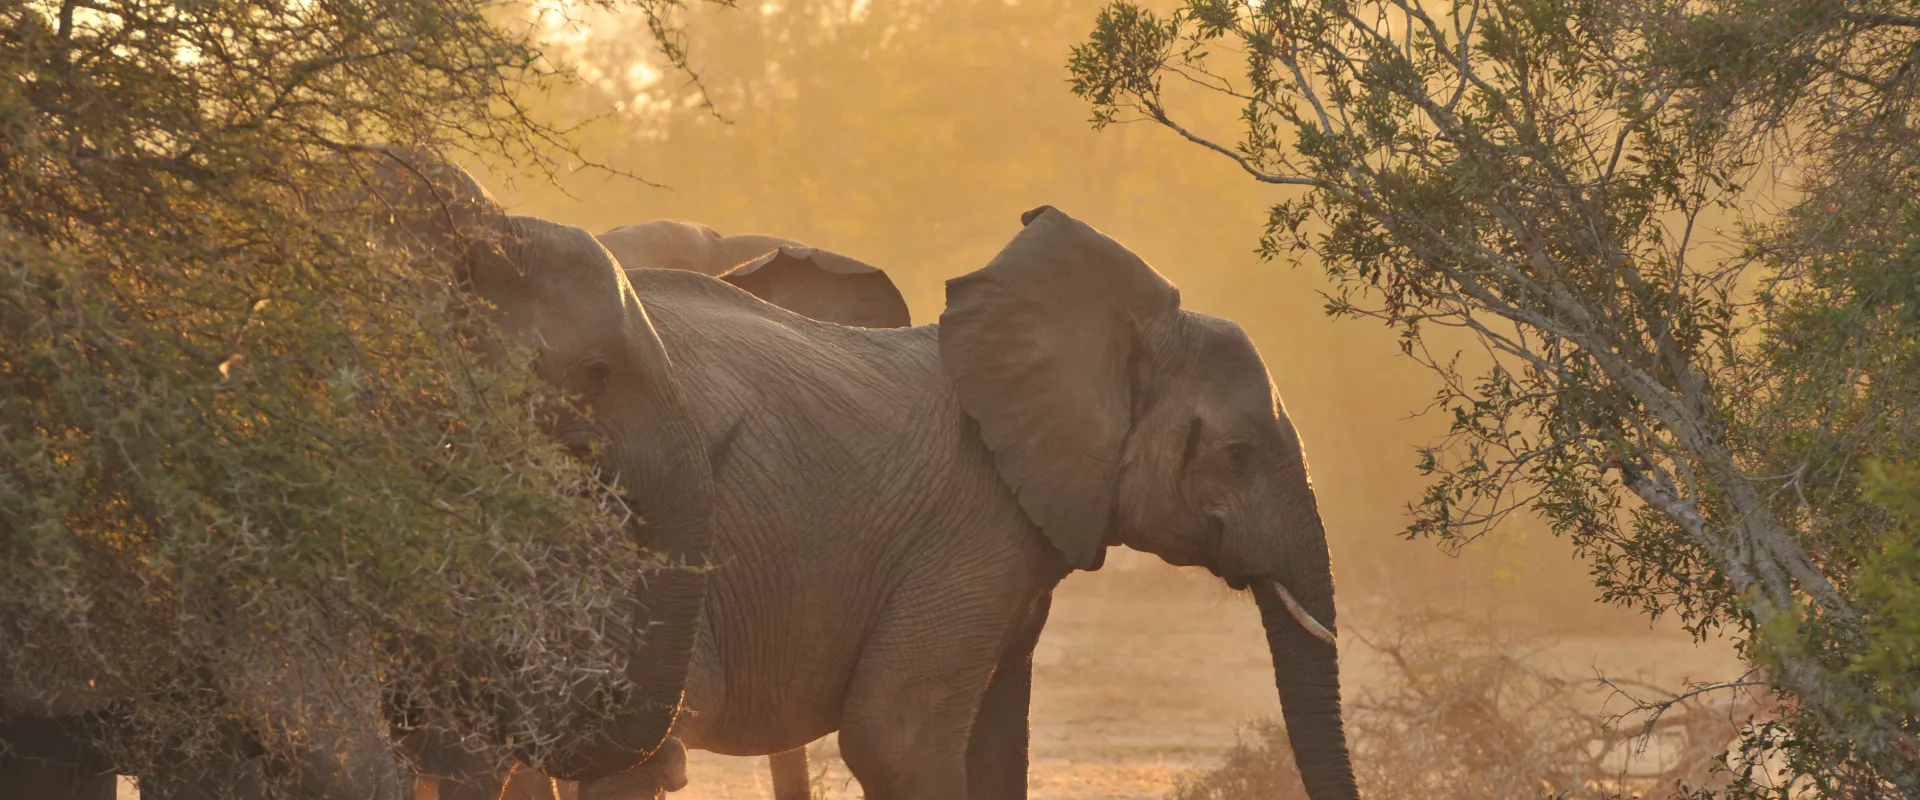 Our Long-Term Commitment to Elephant Conservation